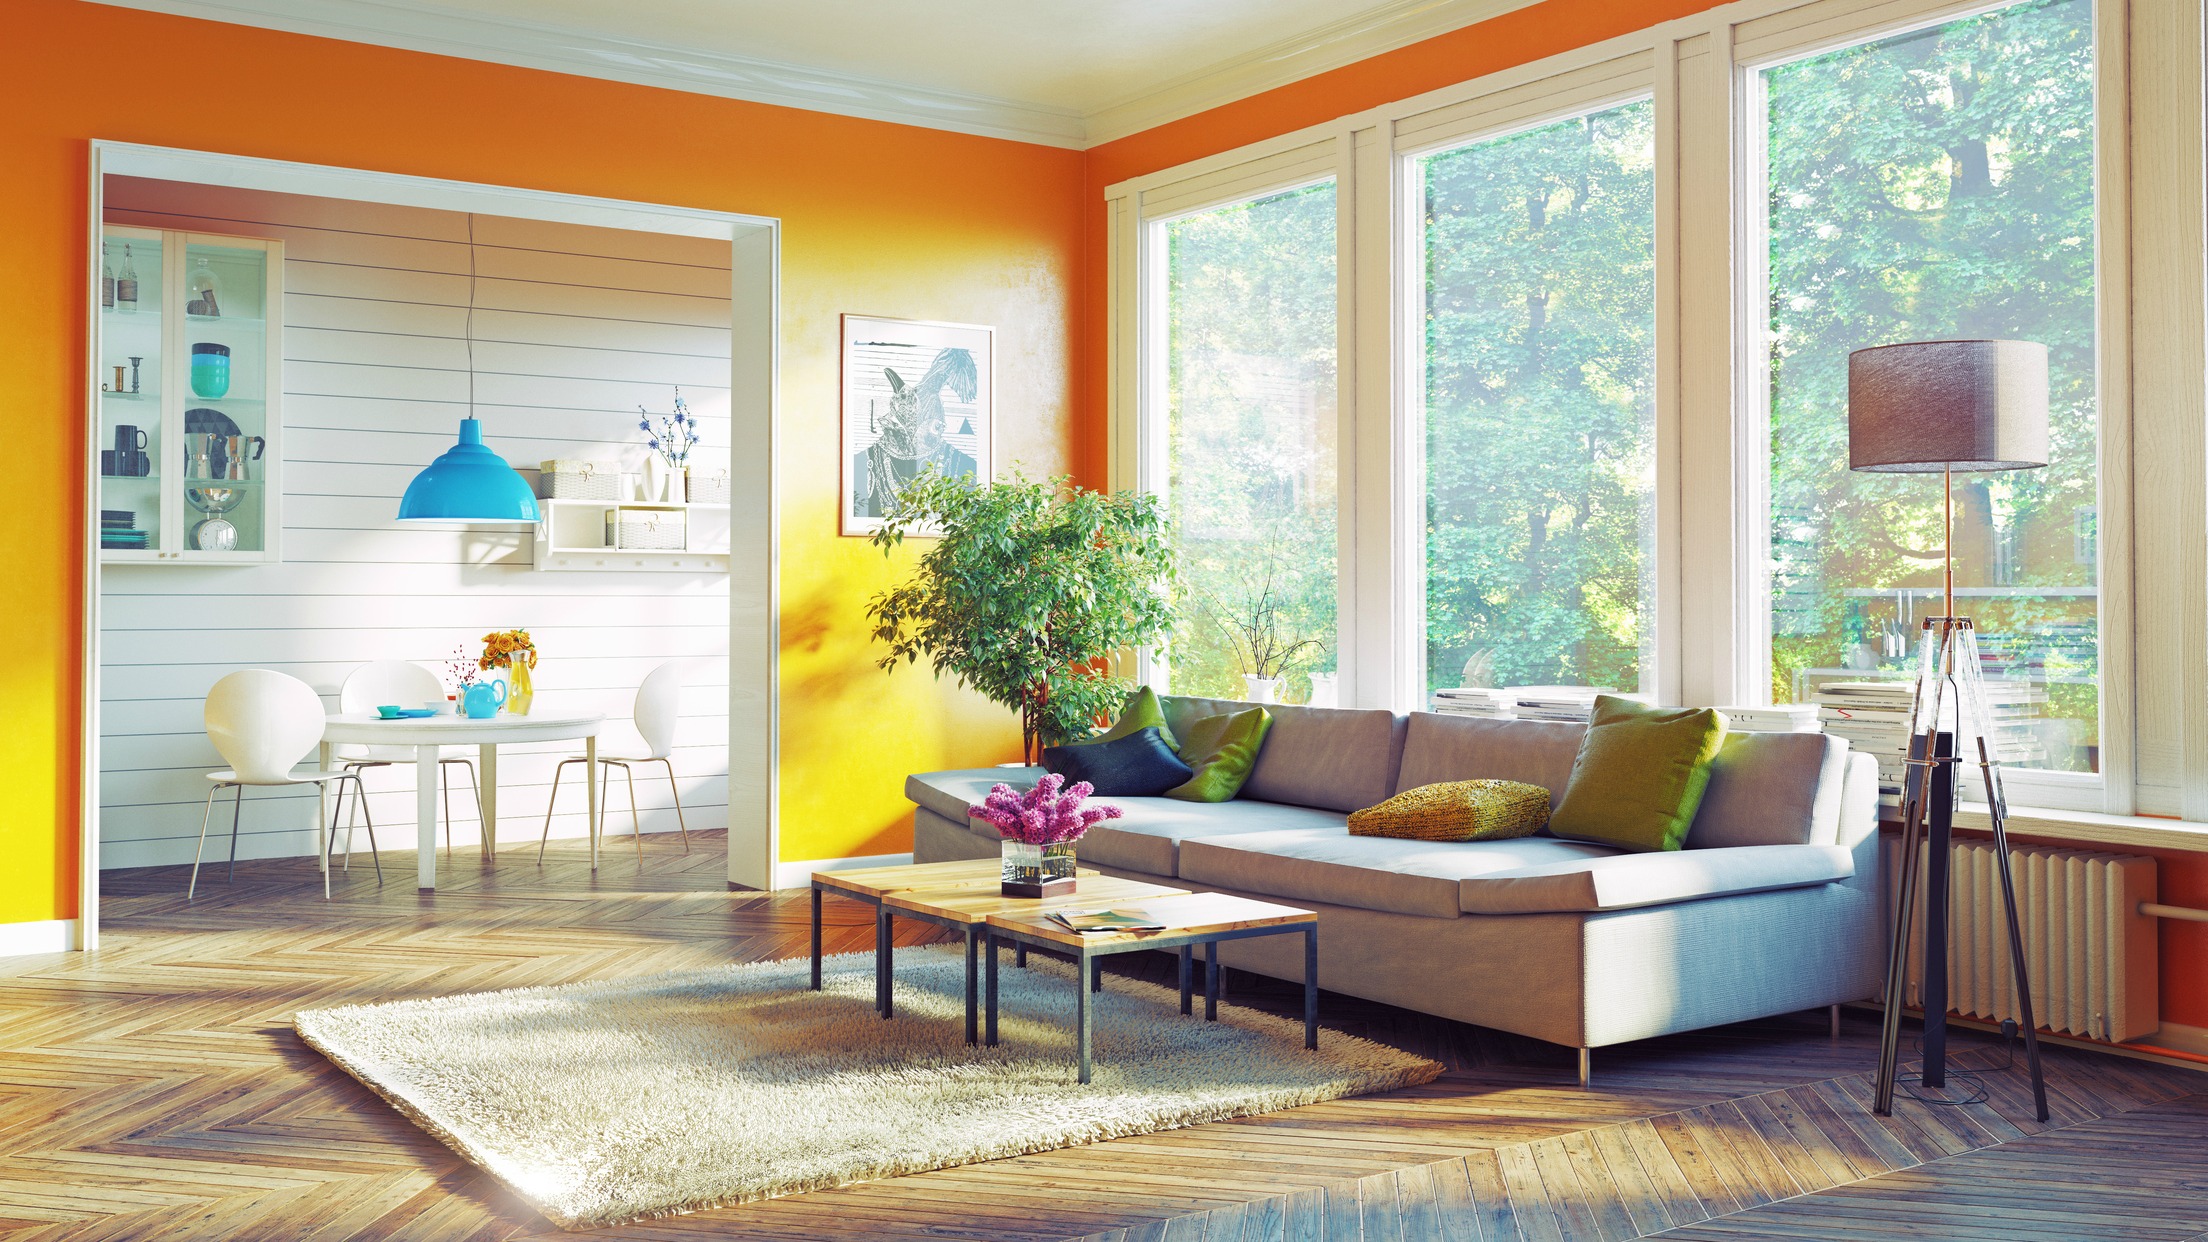 Sell Your Home With These Decorating Tips